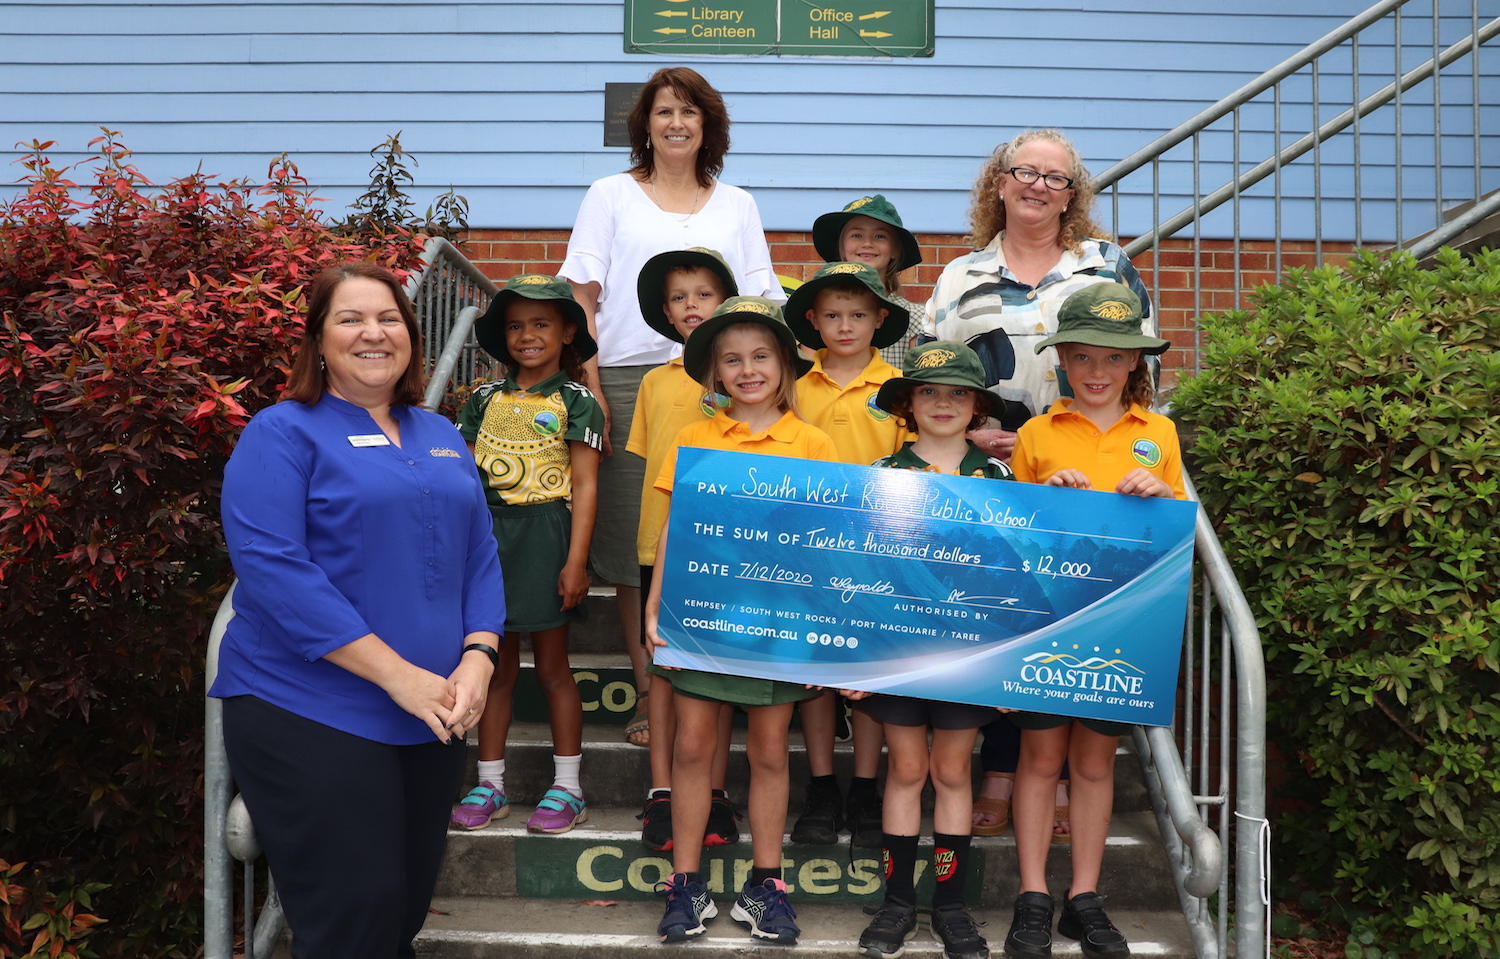 South West Rocks Public School to receive 1000 new guided readers! 